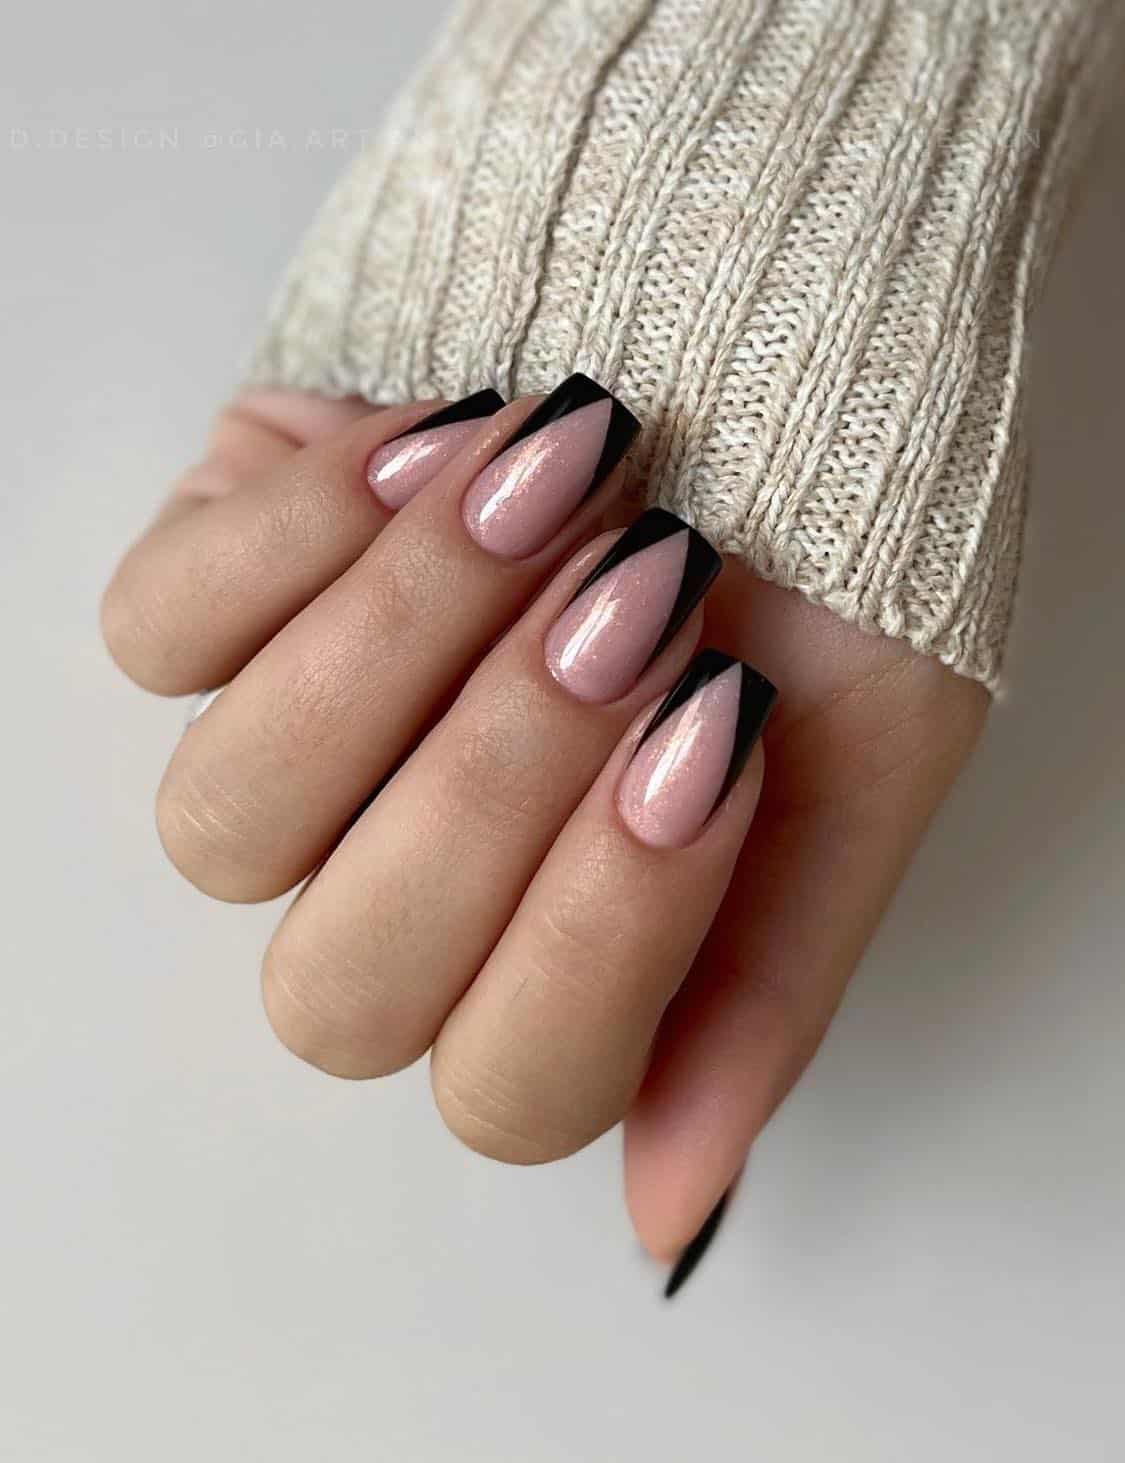 Medium square nails with shimmering nude pink polish and pointed black French tips